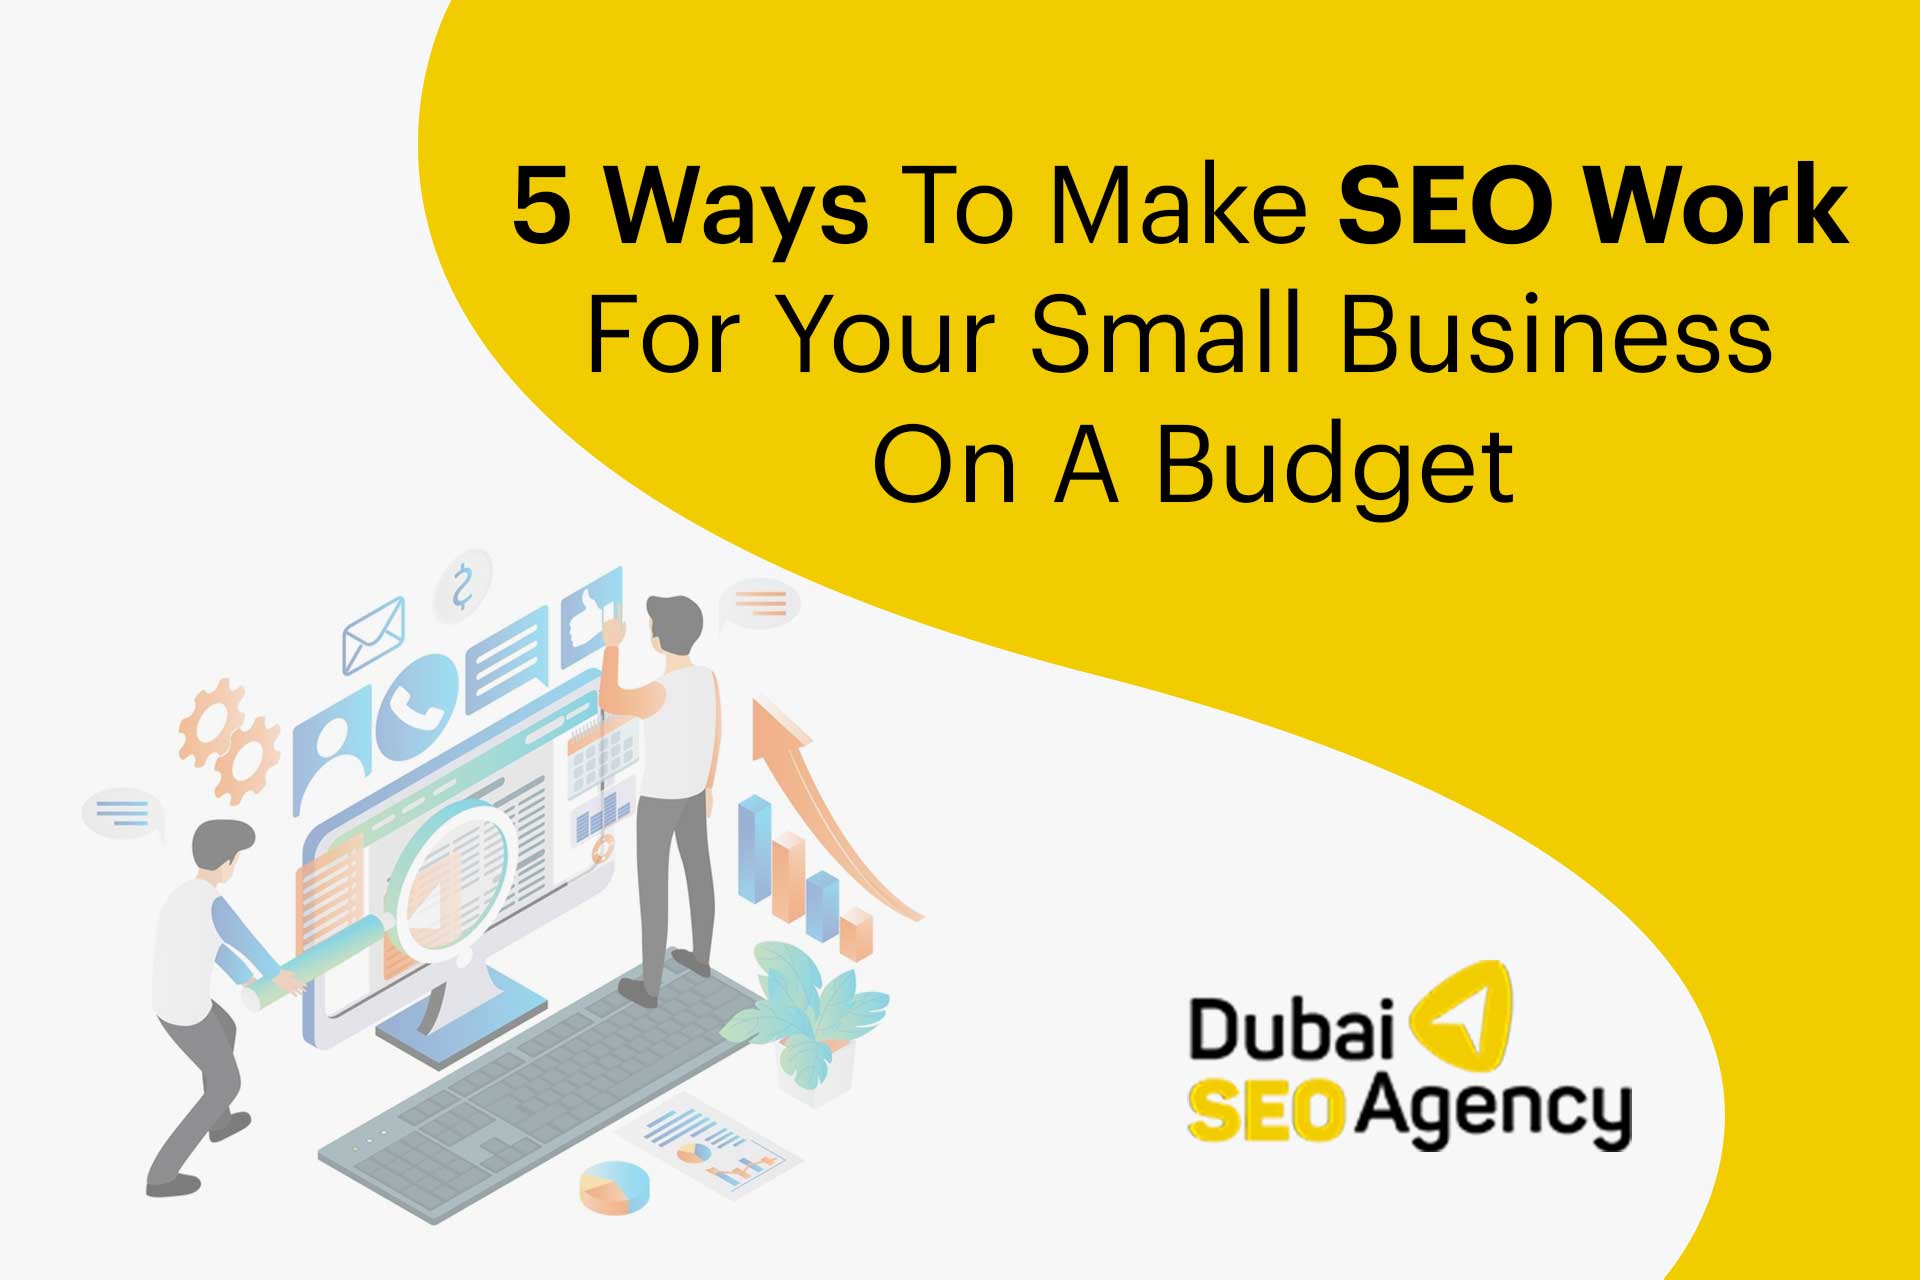 5 Ways To Make SEO Work For Your Small Business On A Budget